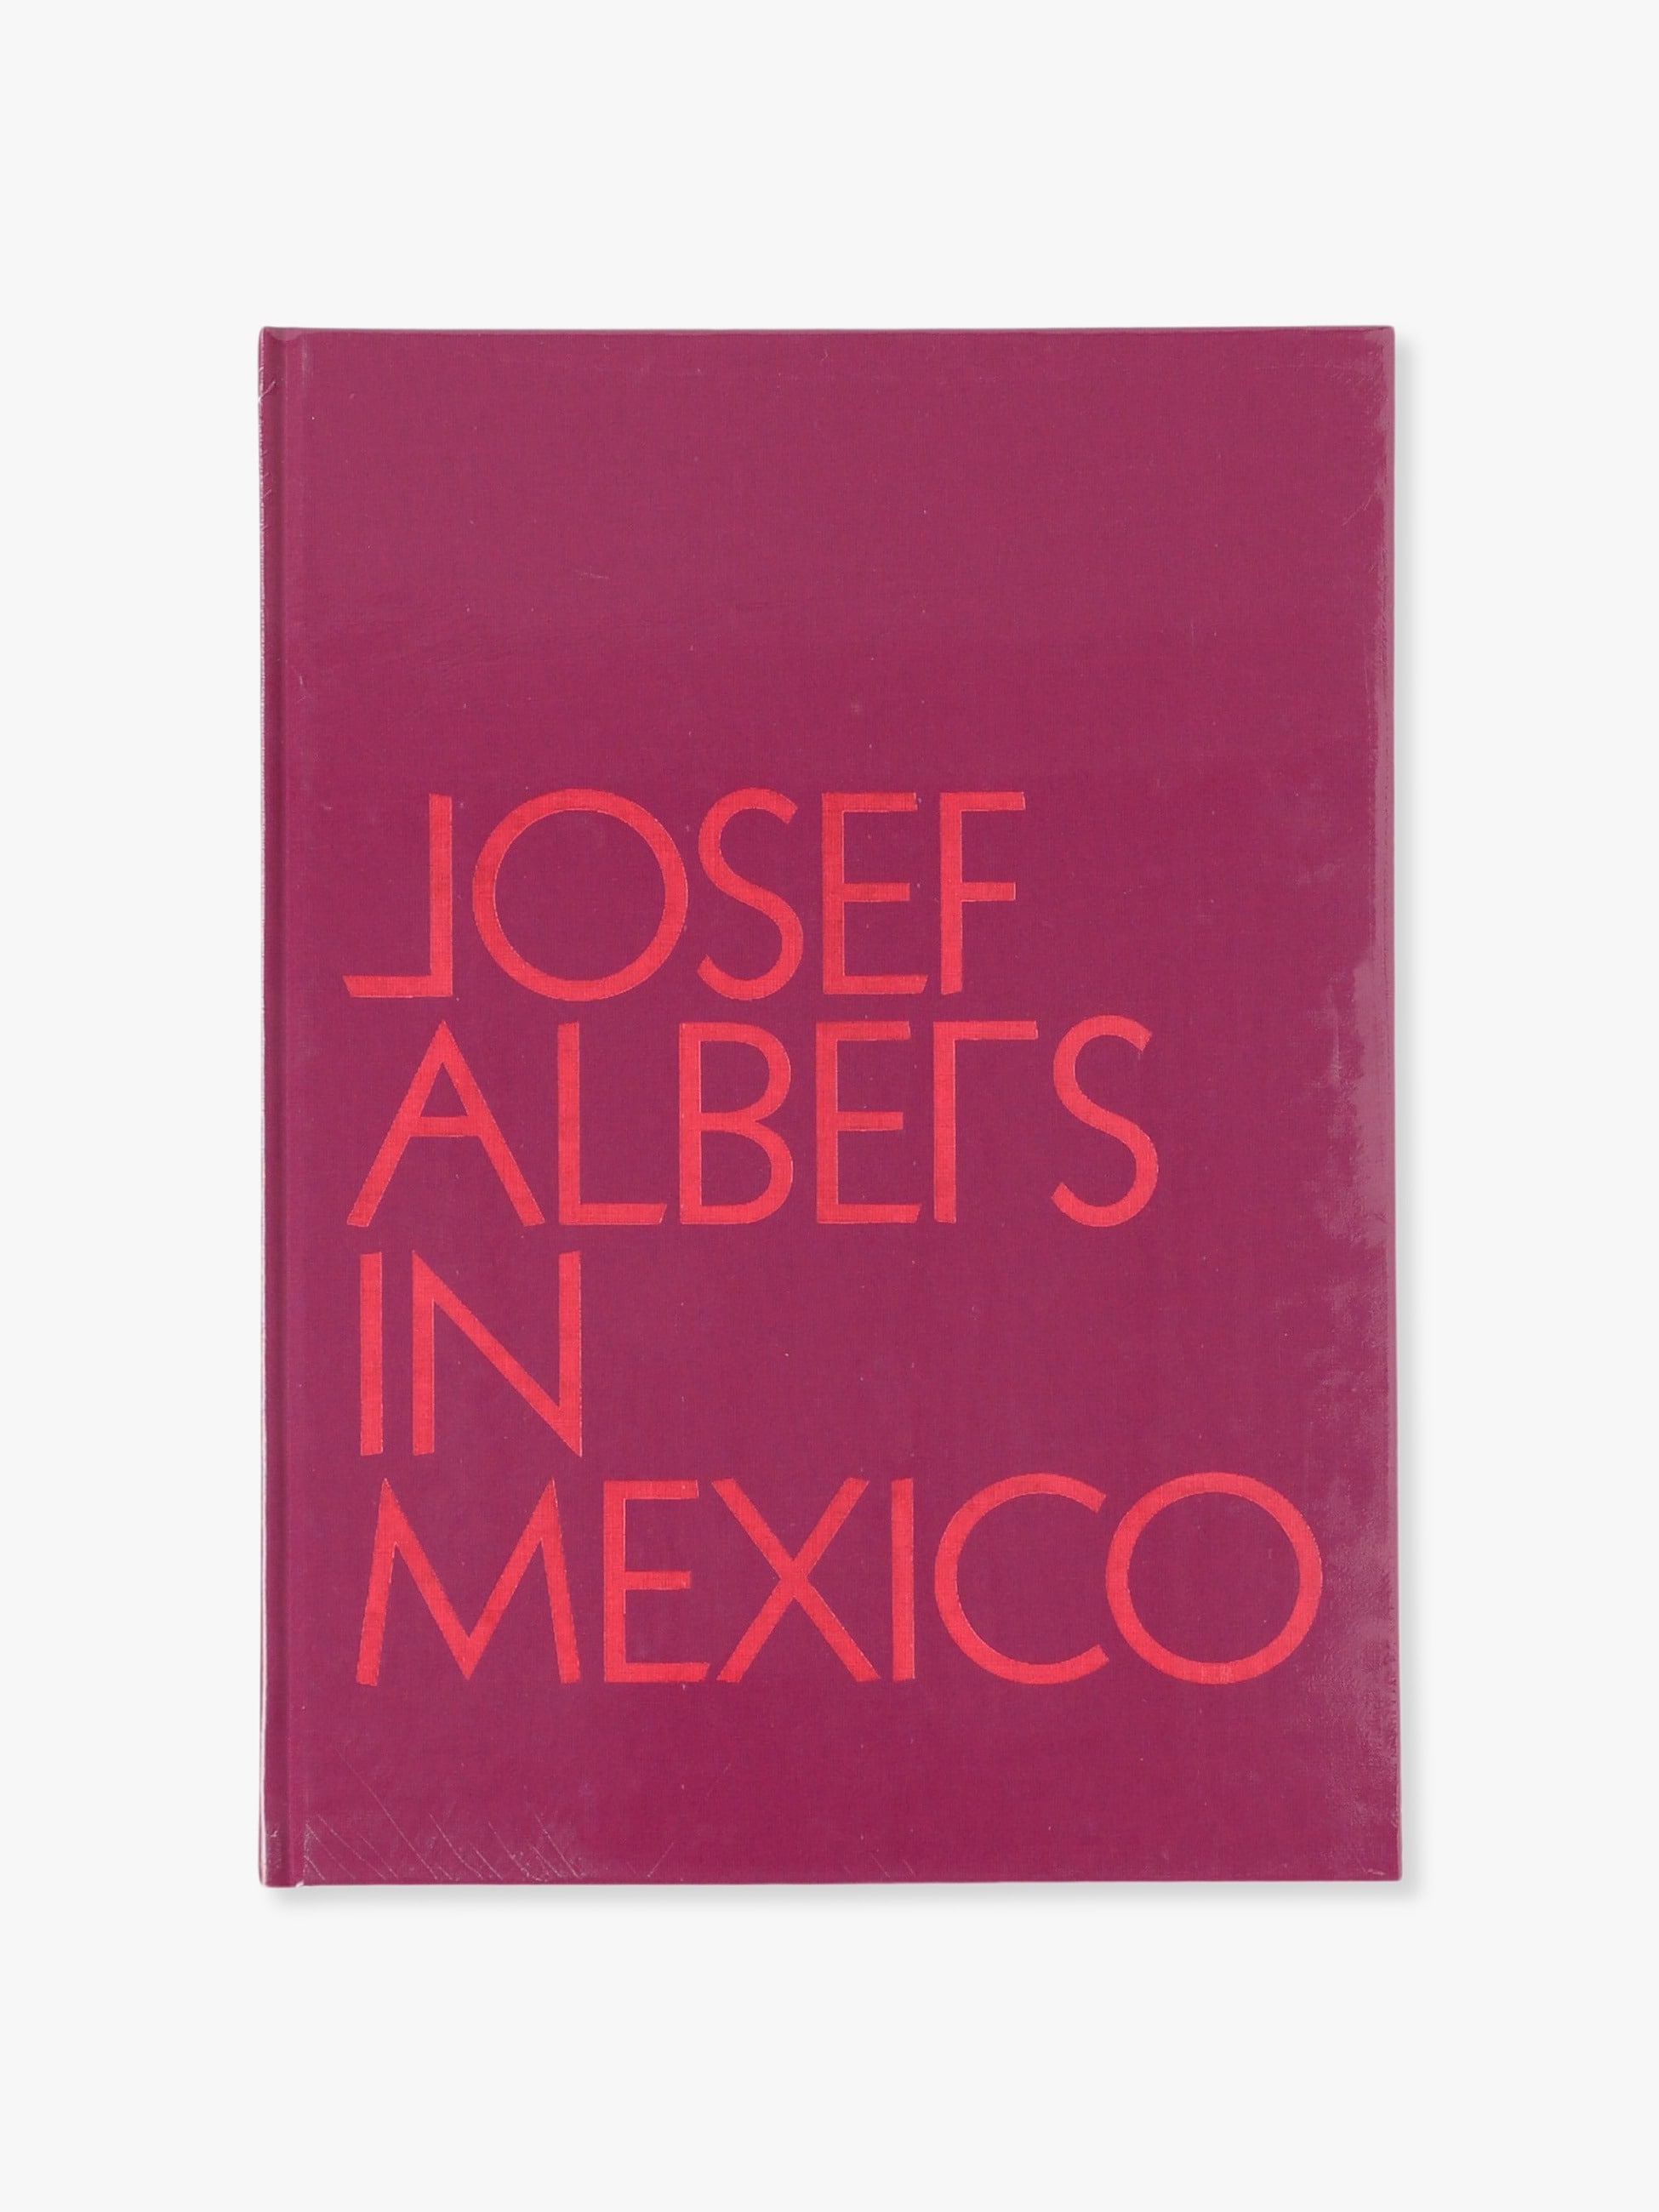 Josef Albers in Mexico 詳細画像 other 1